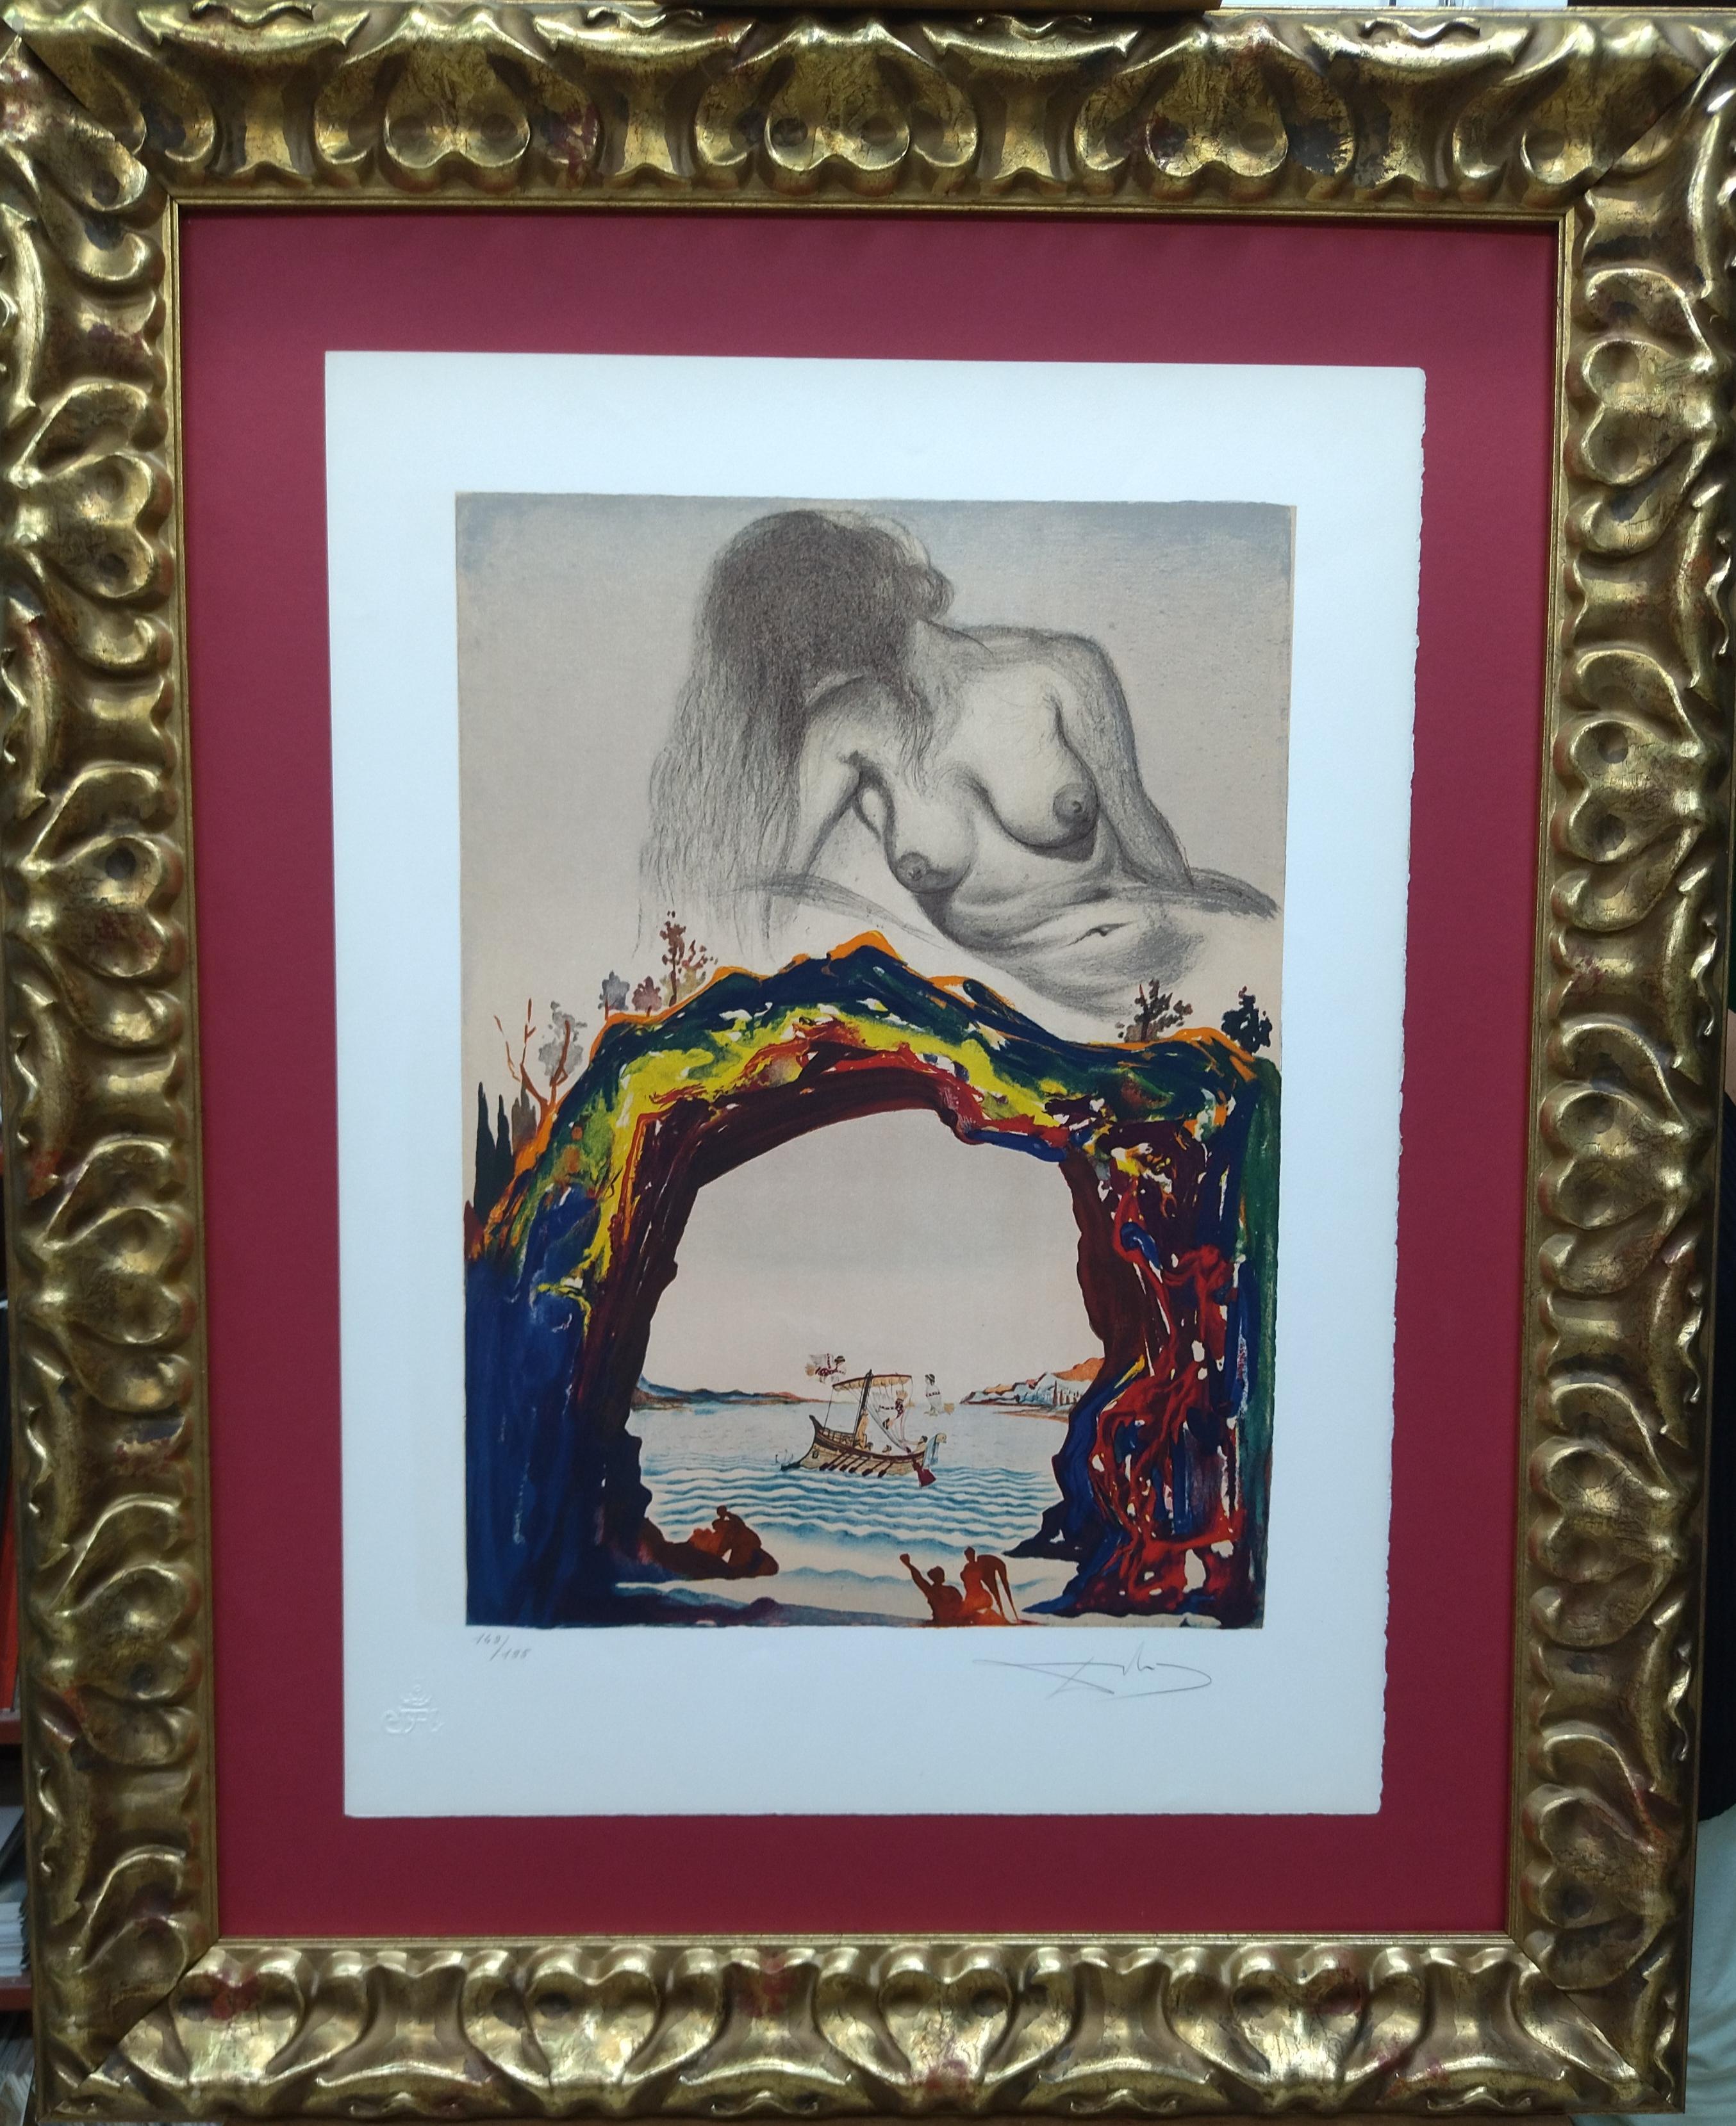 Dali  Vertical    La Sirene lithograph certificate painting - Print by Salvador Dalí